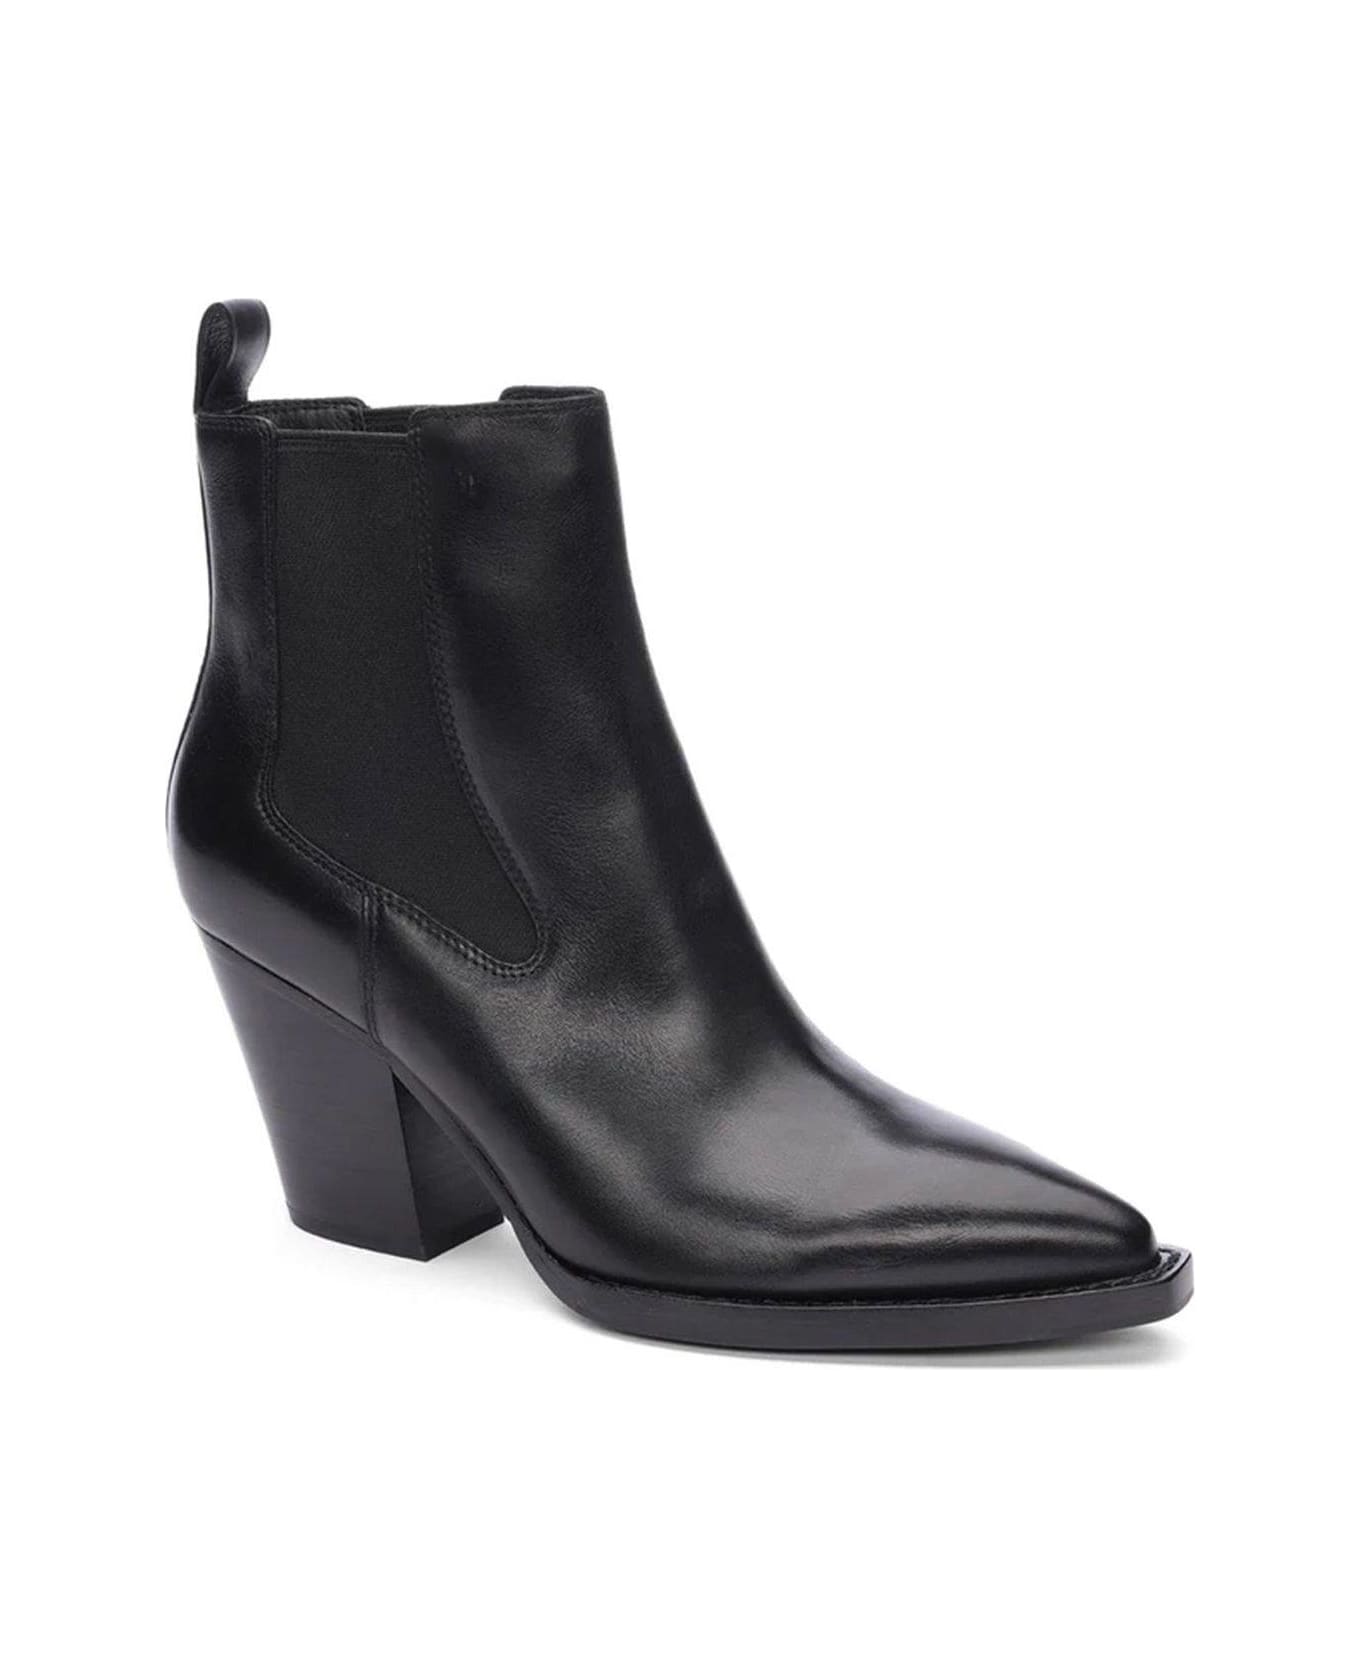 Ash Pointed-toe Ankle Boots Boots - NERO ブーツ